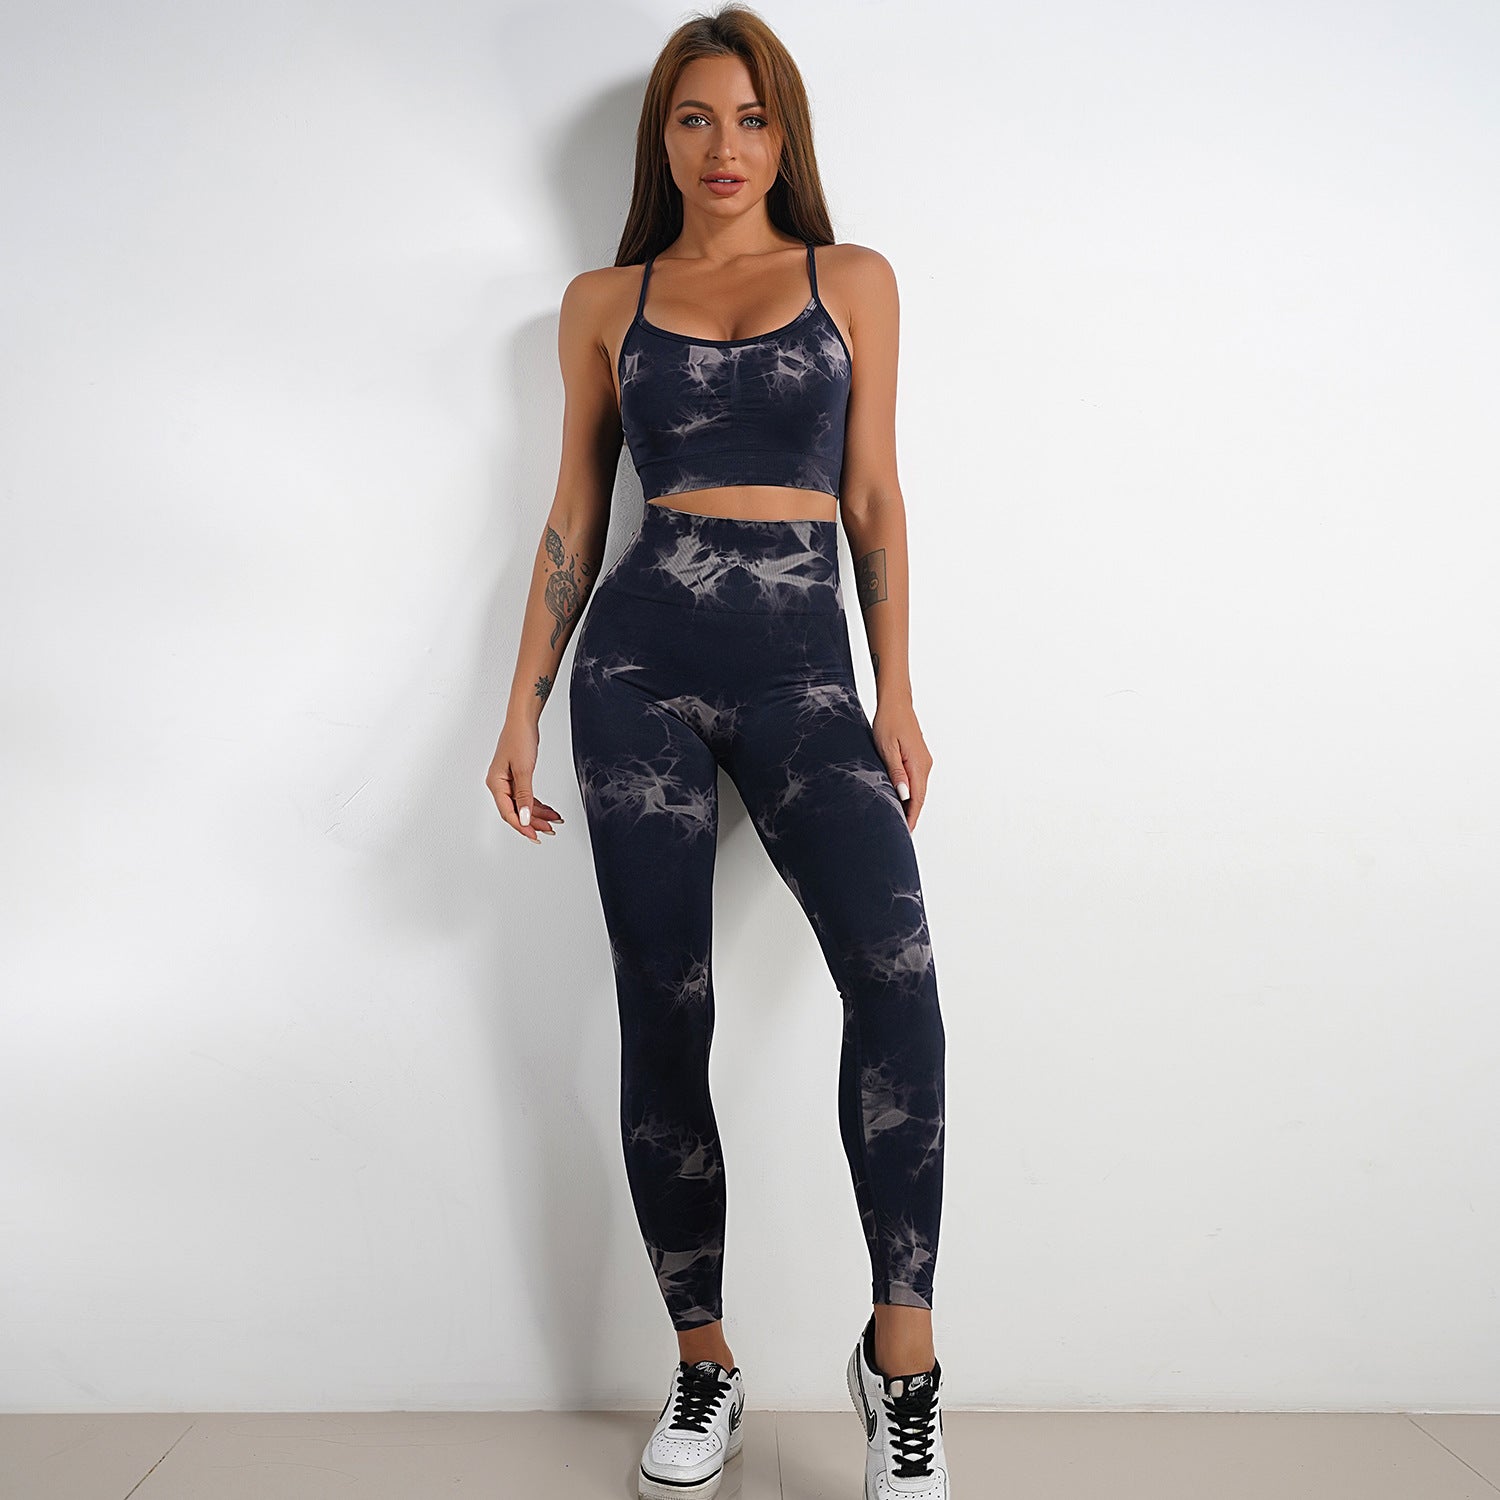 Seamless Knitted Tie Dyed Yoga Clothes Fitness Suit Sports High Waist Elastic Pants Women